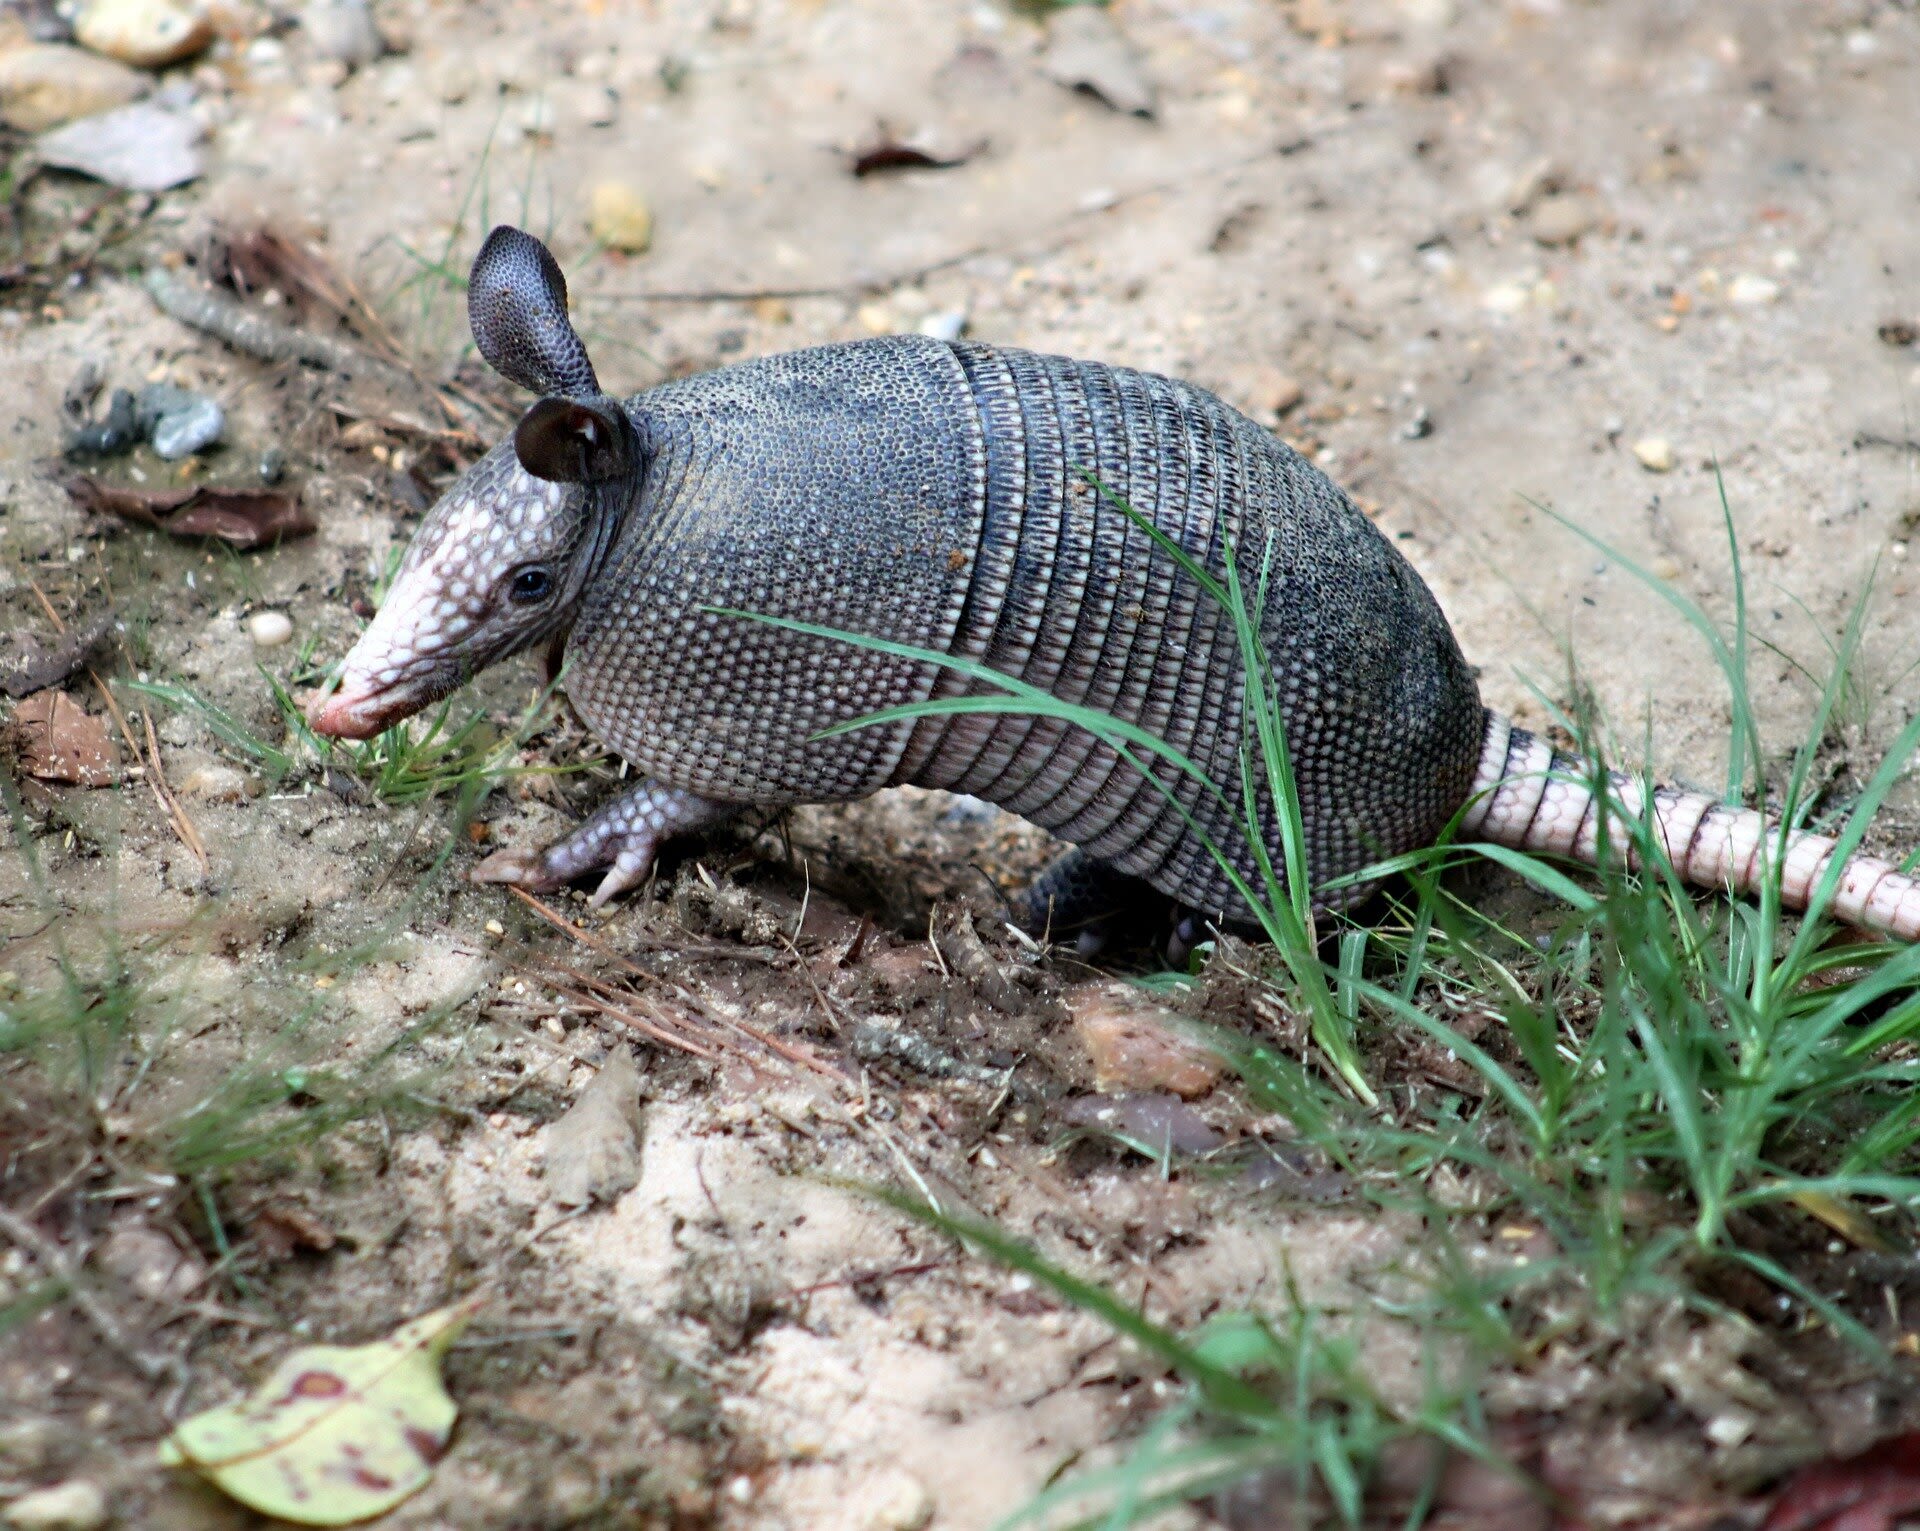 The case of the armadillo: Is it spreading leprosy in Florida?